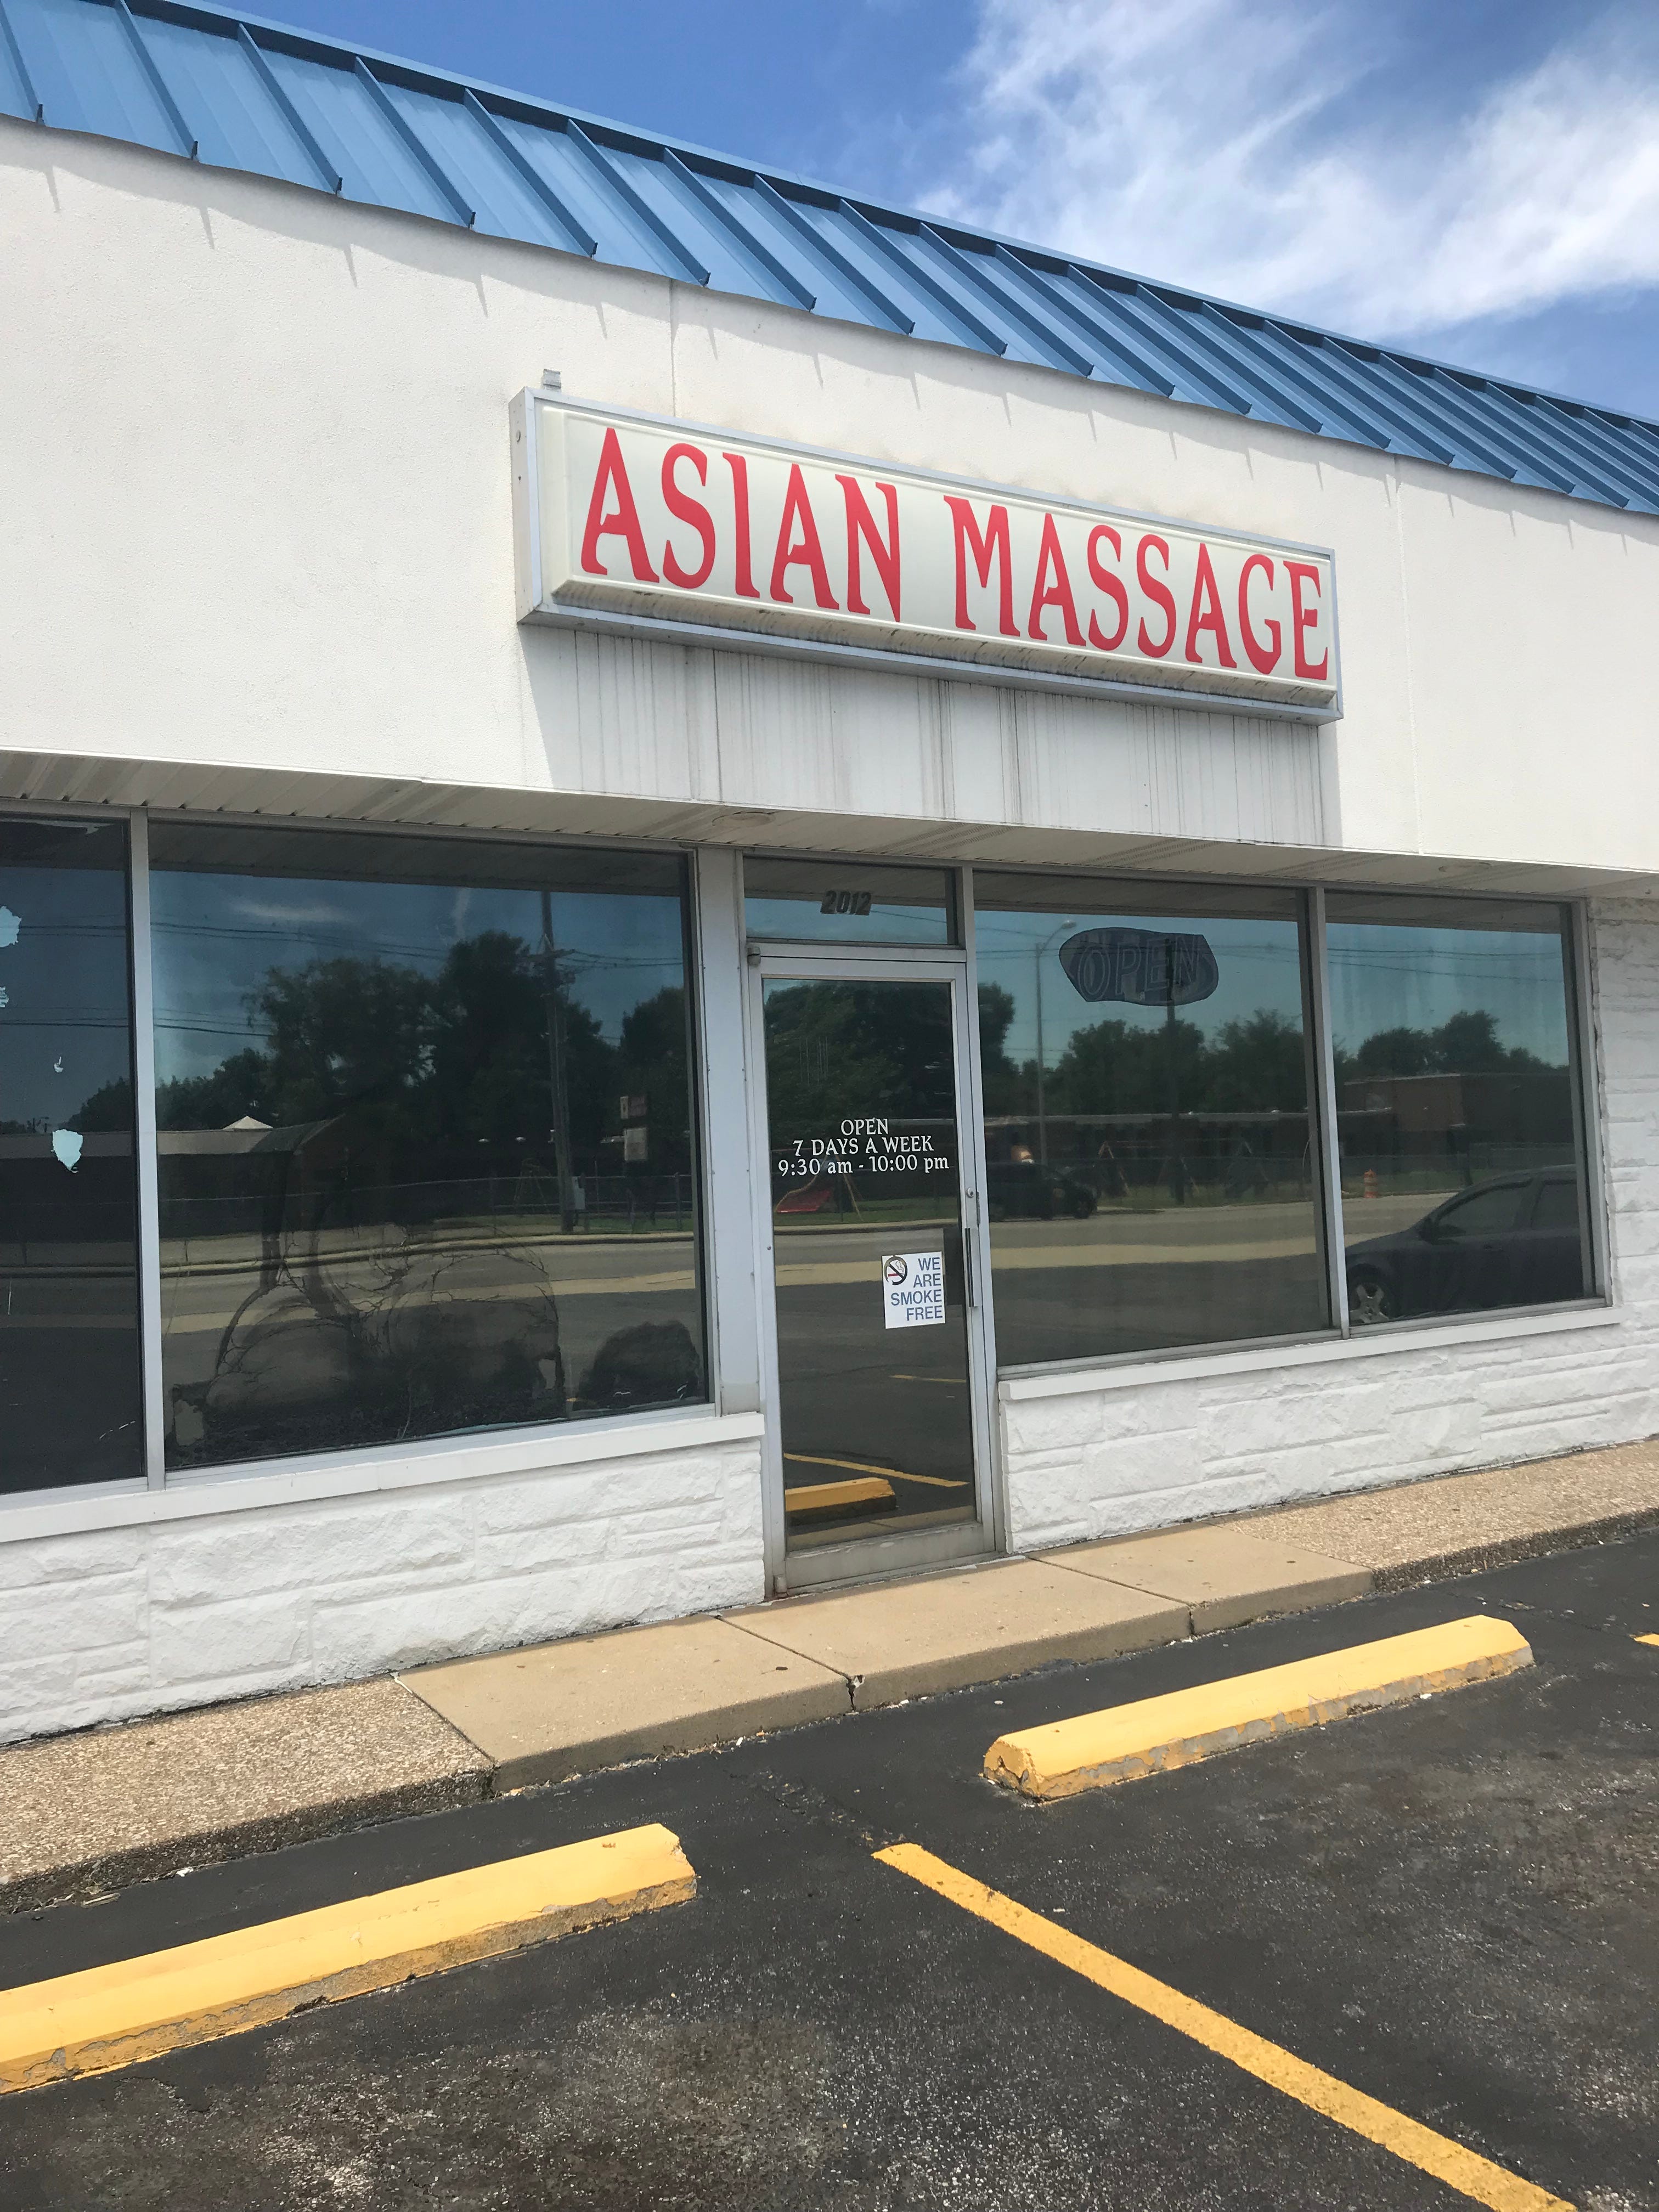 Asian Massage Parlor In Tennessee Telegraph